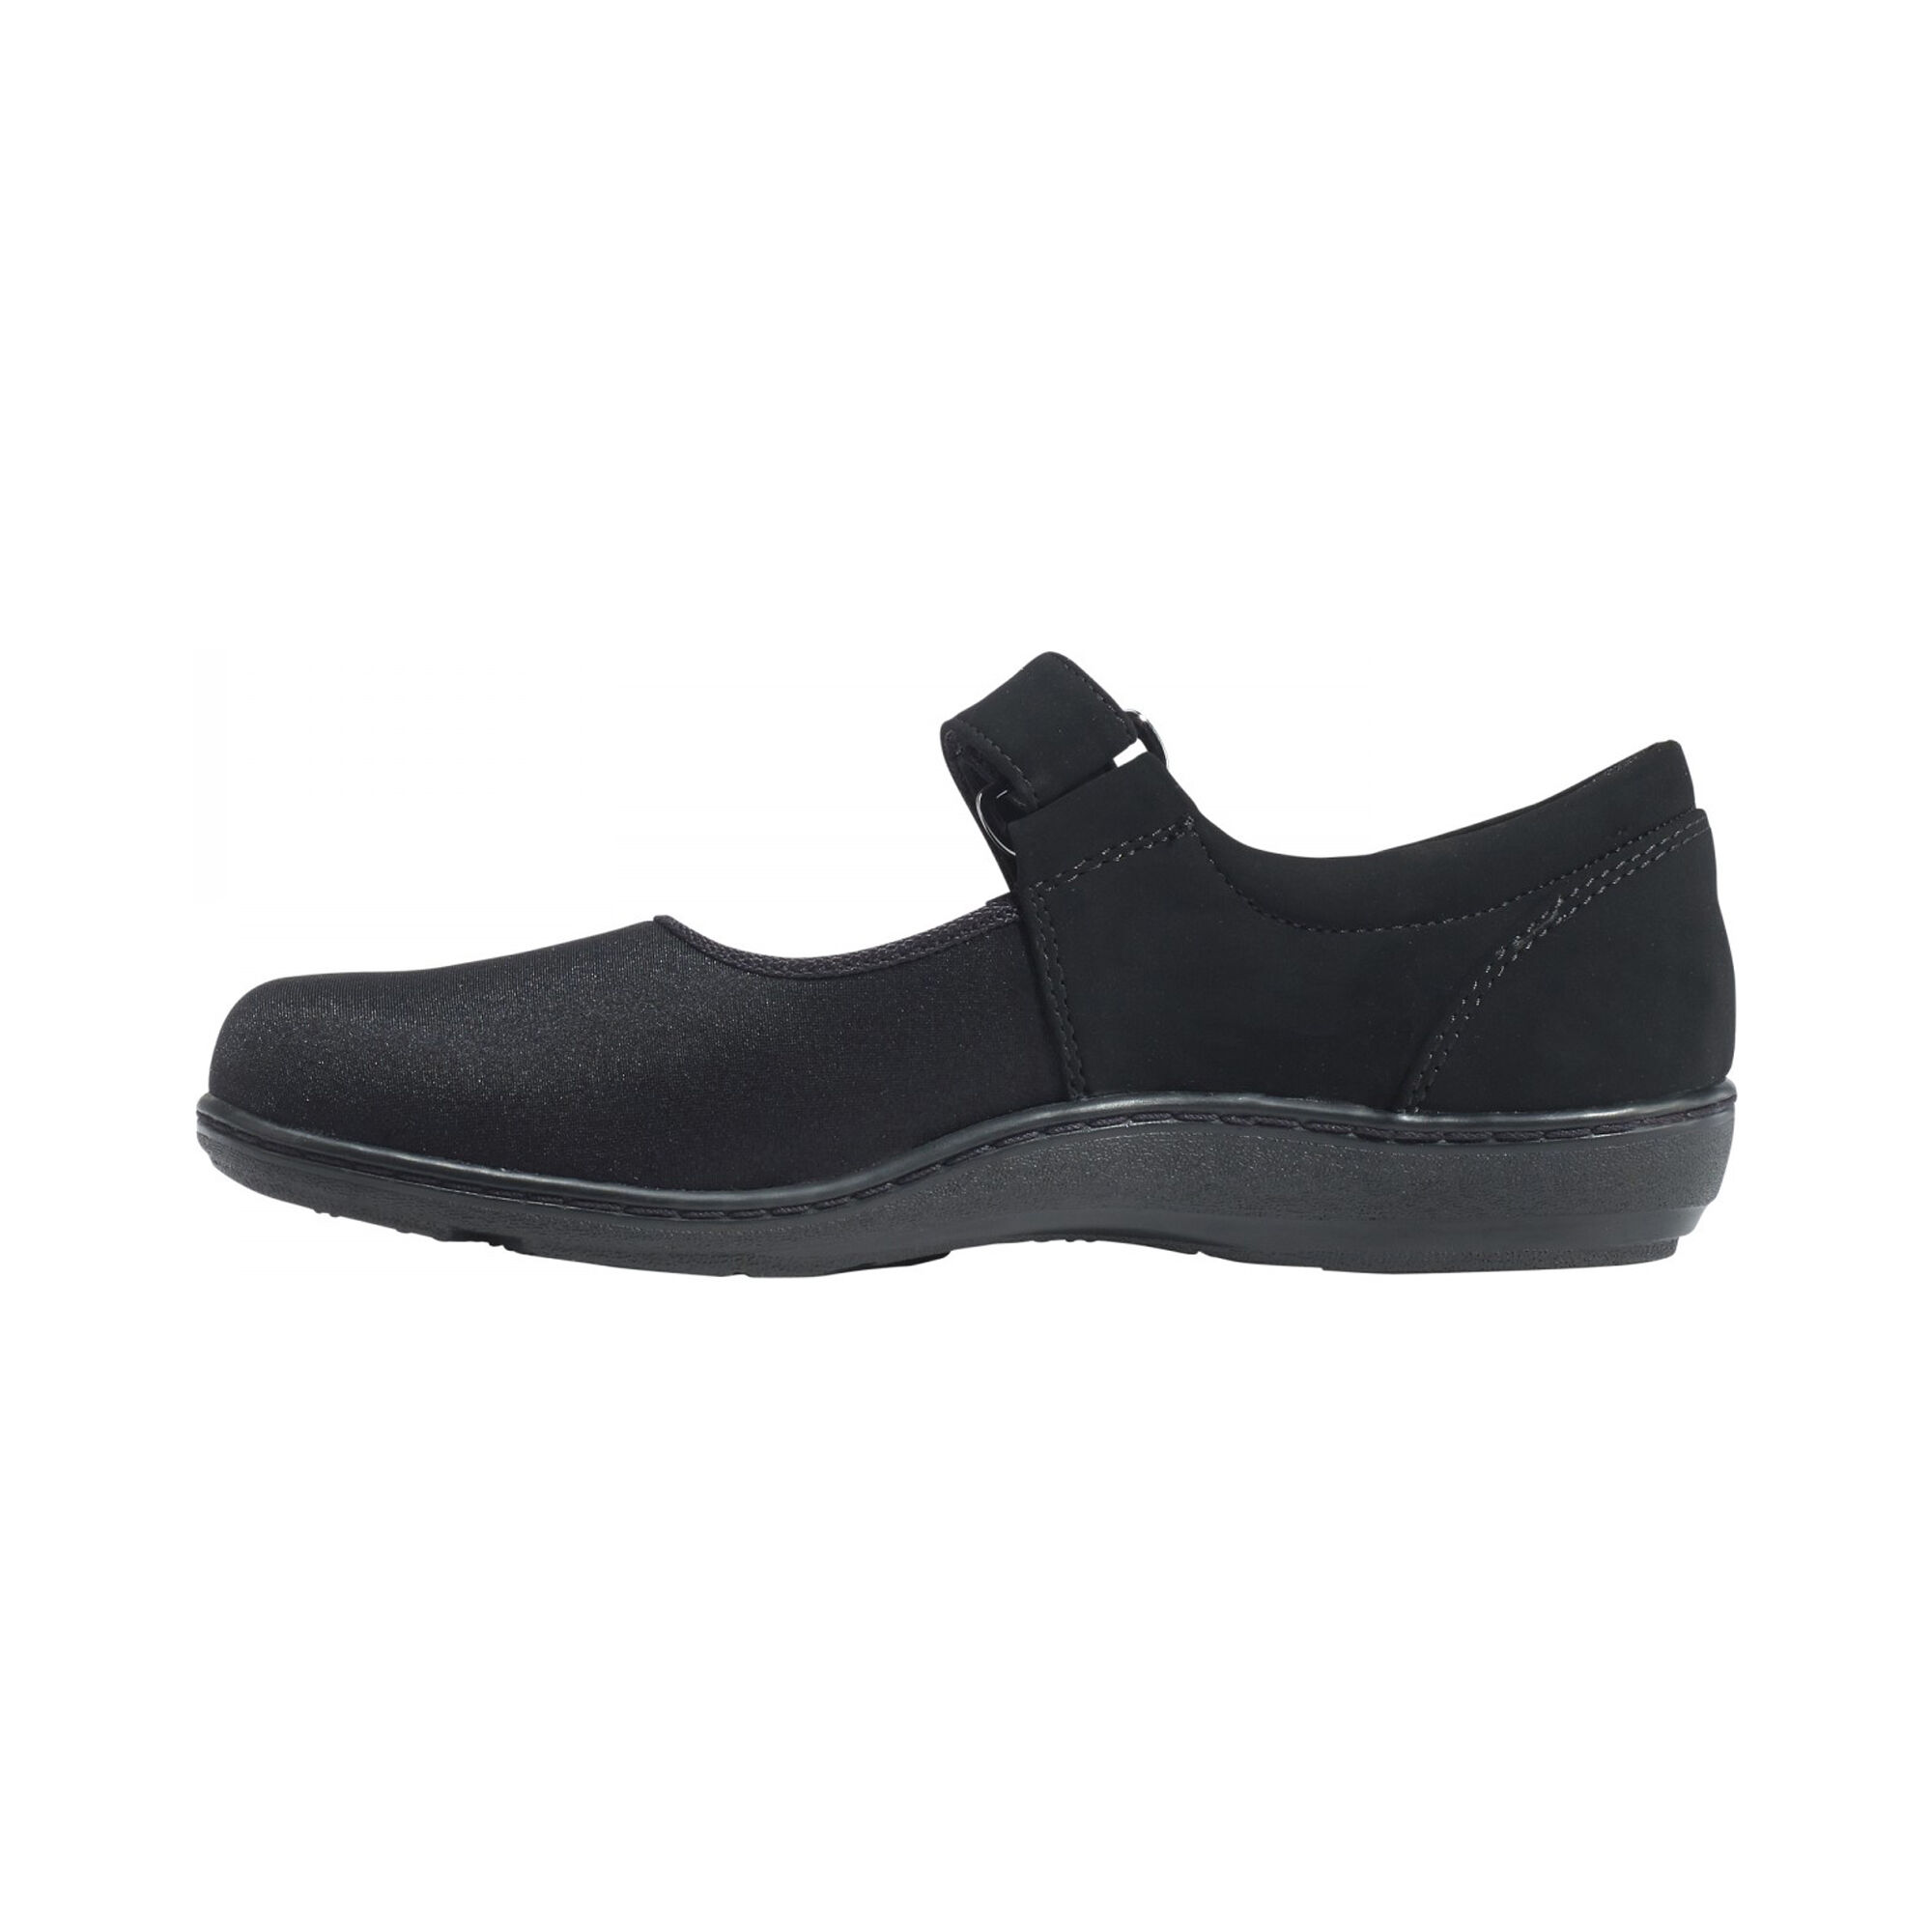 aetrex mary jane shoes on sale